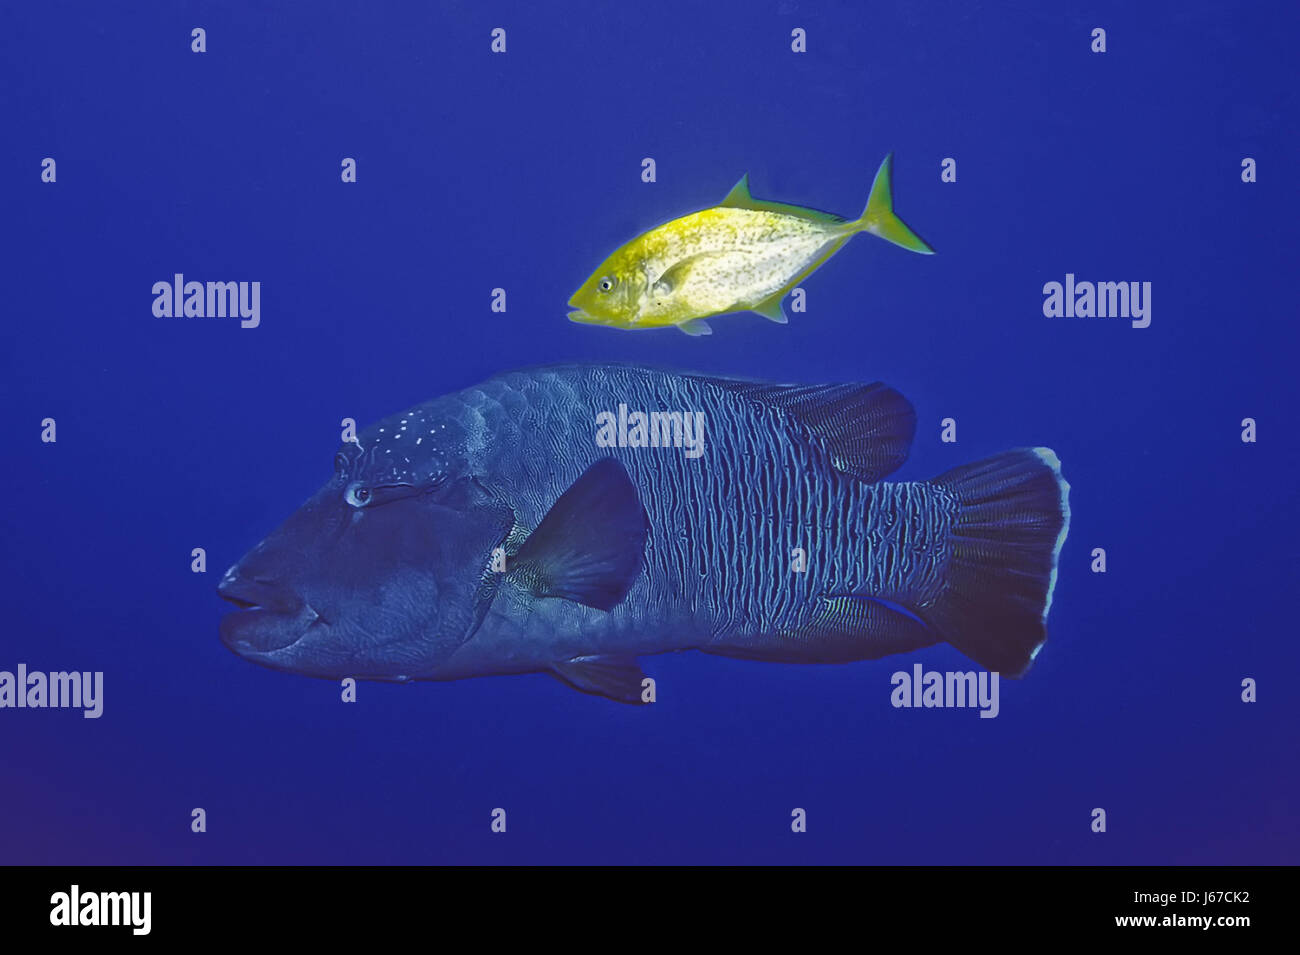 fish pisces blue green fish lips underwater hunt dive camouflage pisces Stock Photo